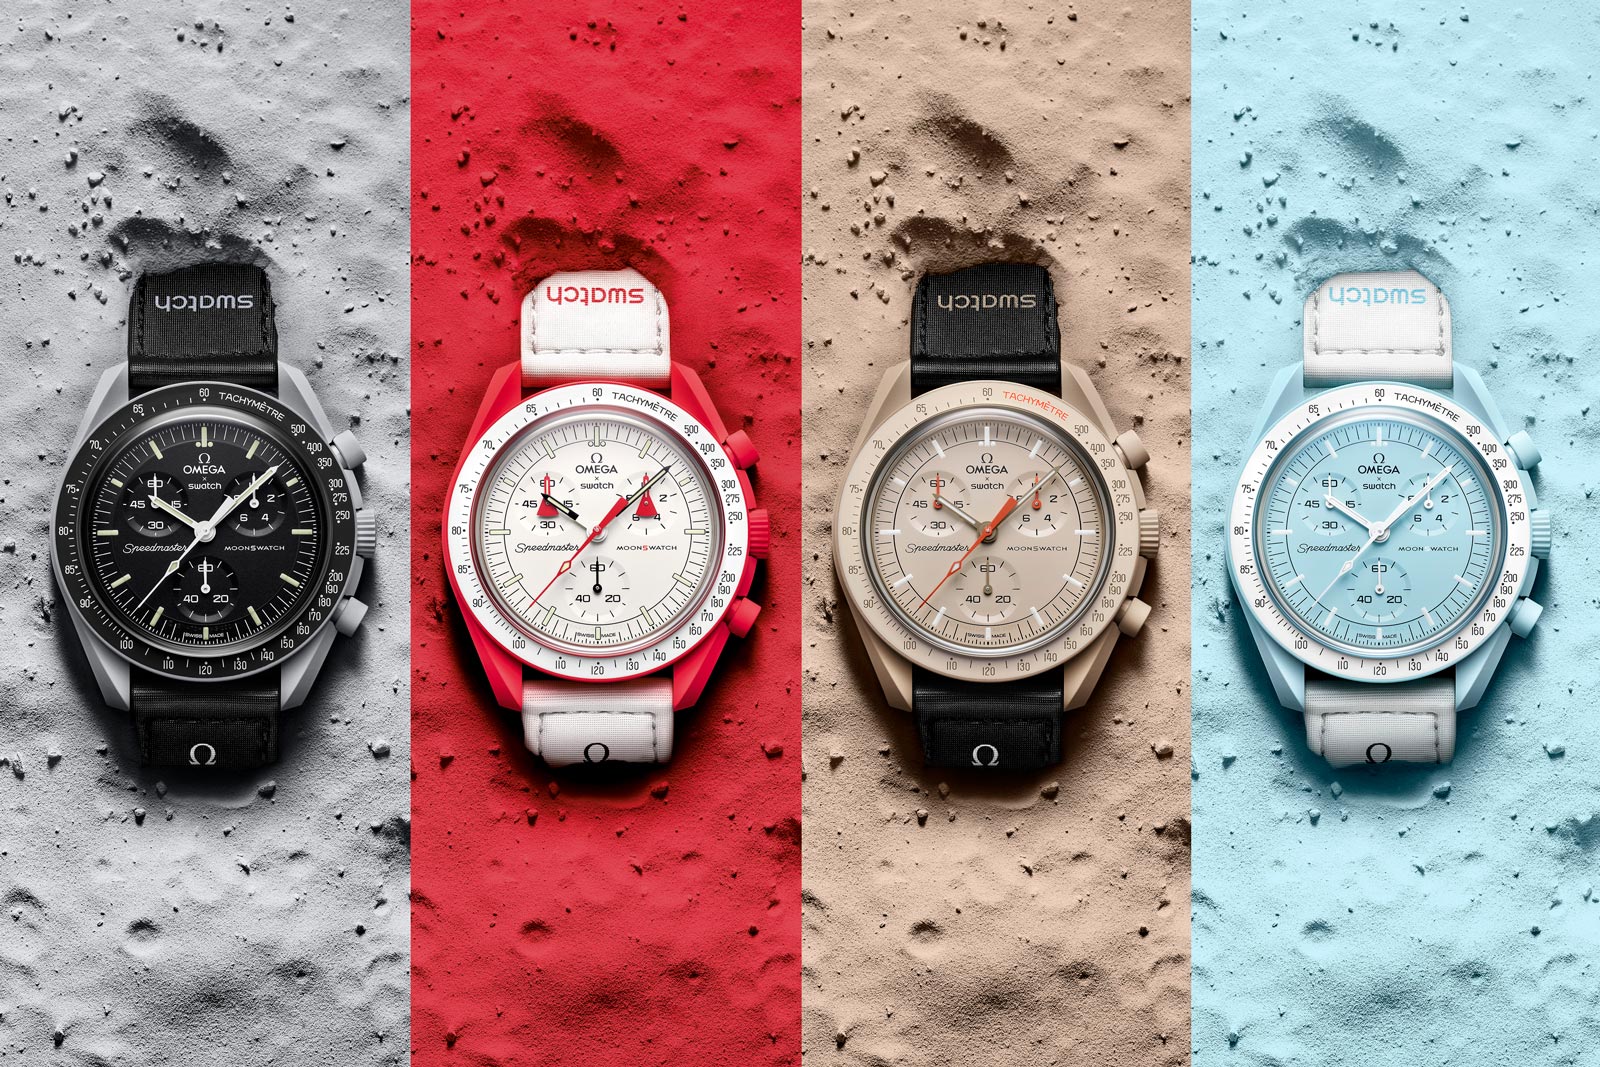 Swatch Drops the Bioceramic MoonSwatch Collab with Omega | SJX Watches